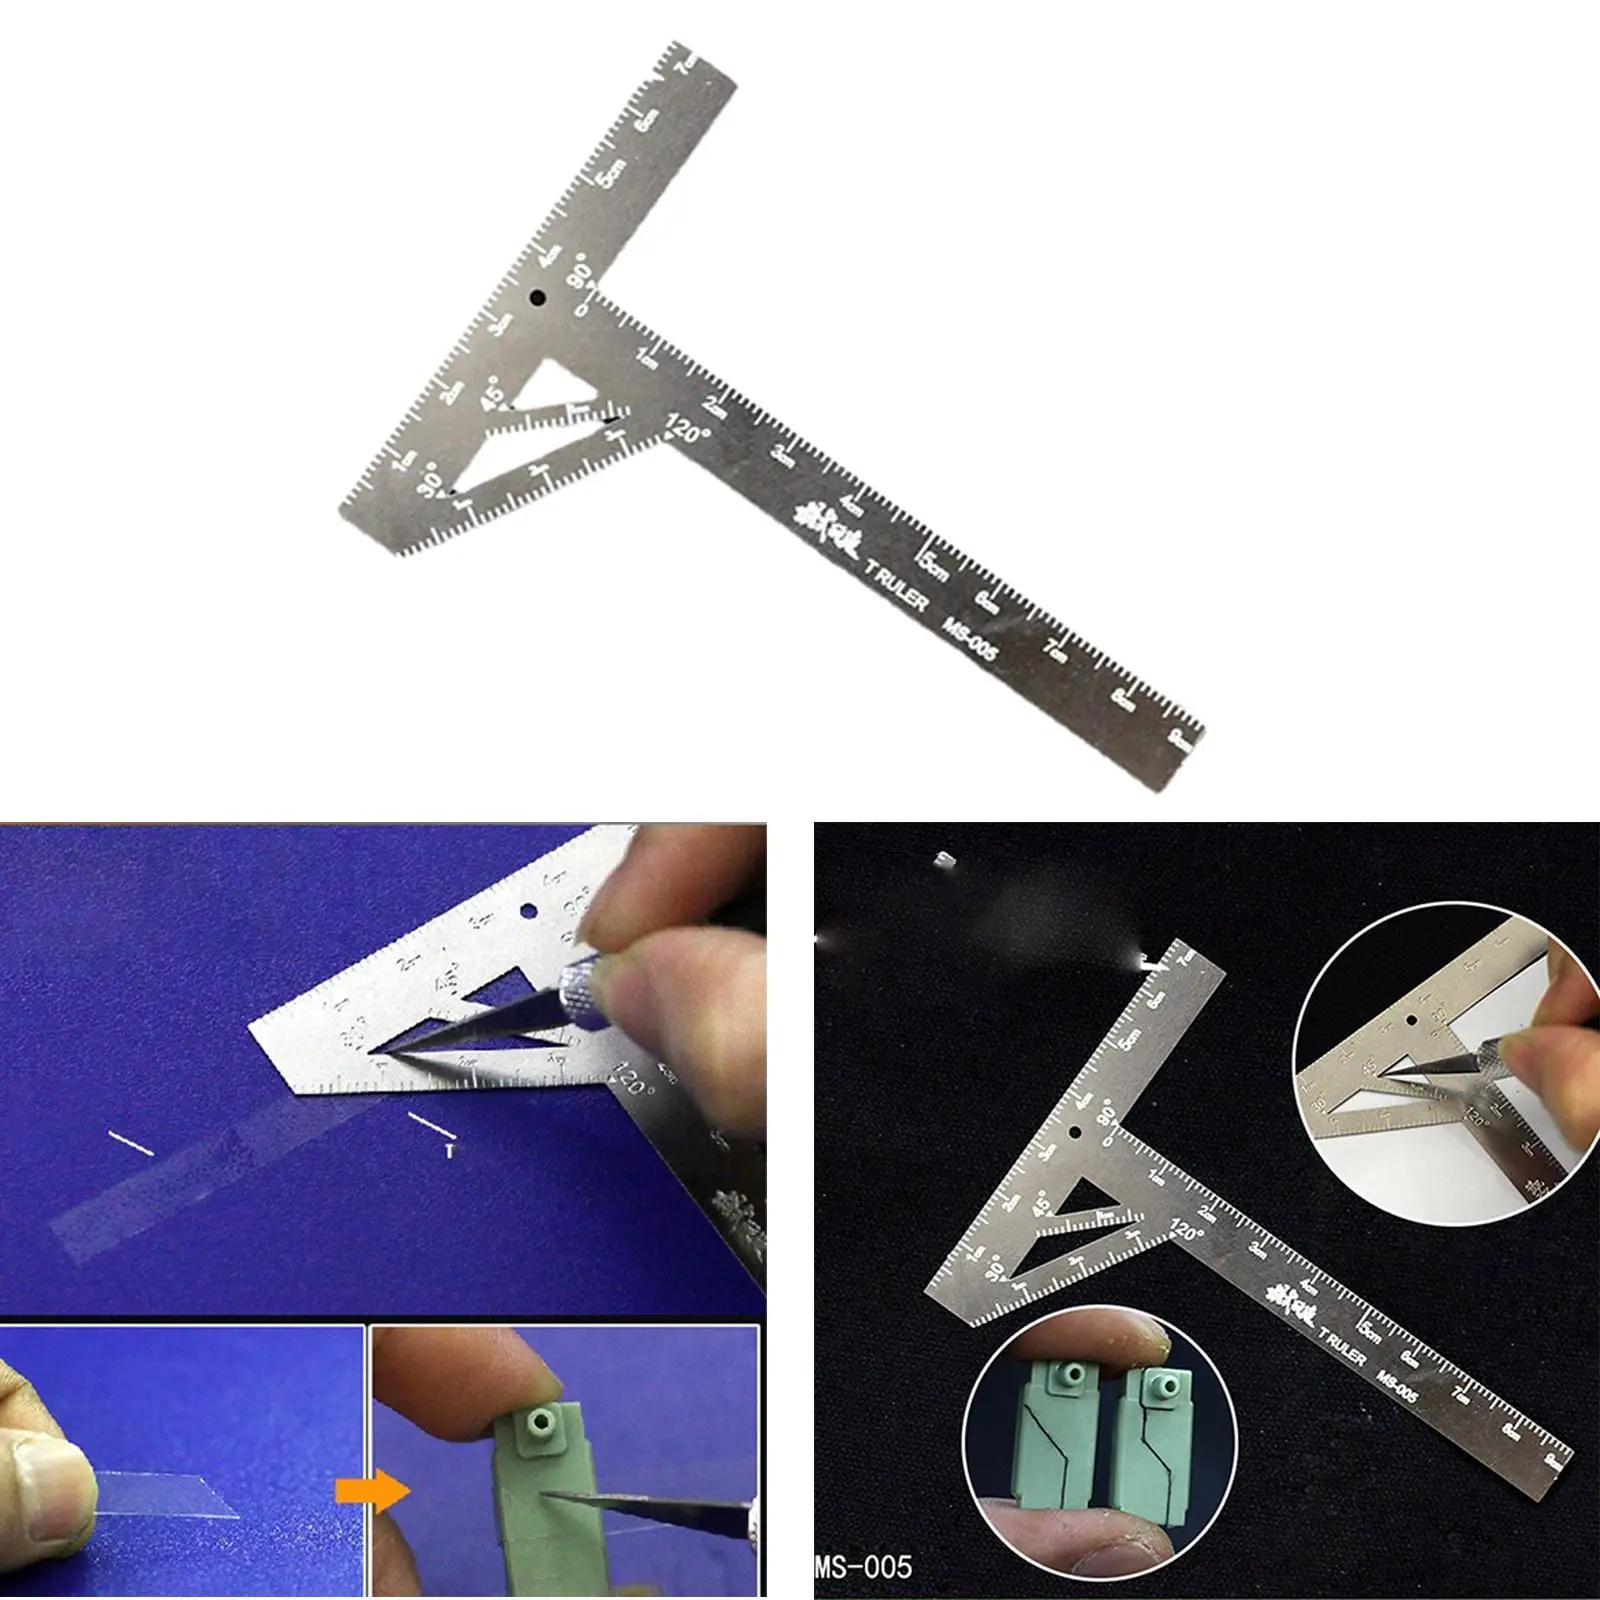 Transform Stainless Steel T-shaped Ruler Upgrade Modeling Craft